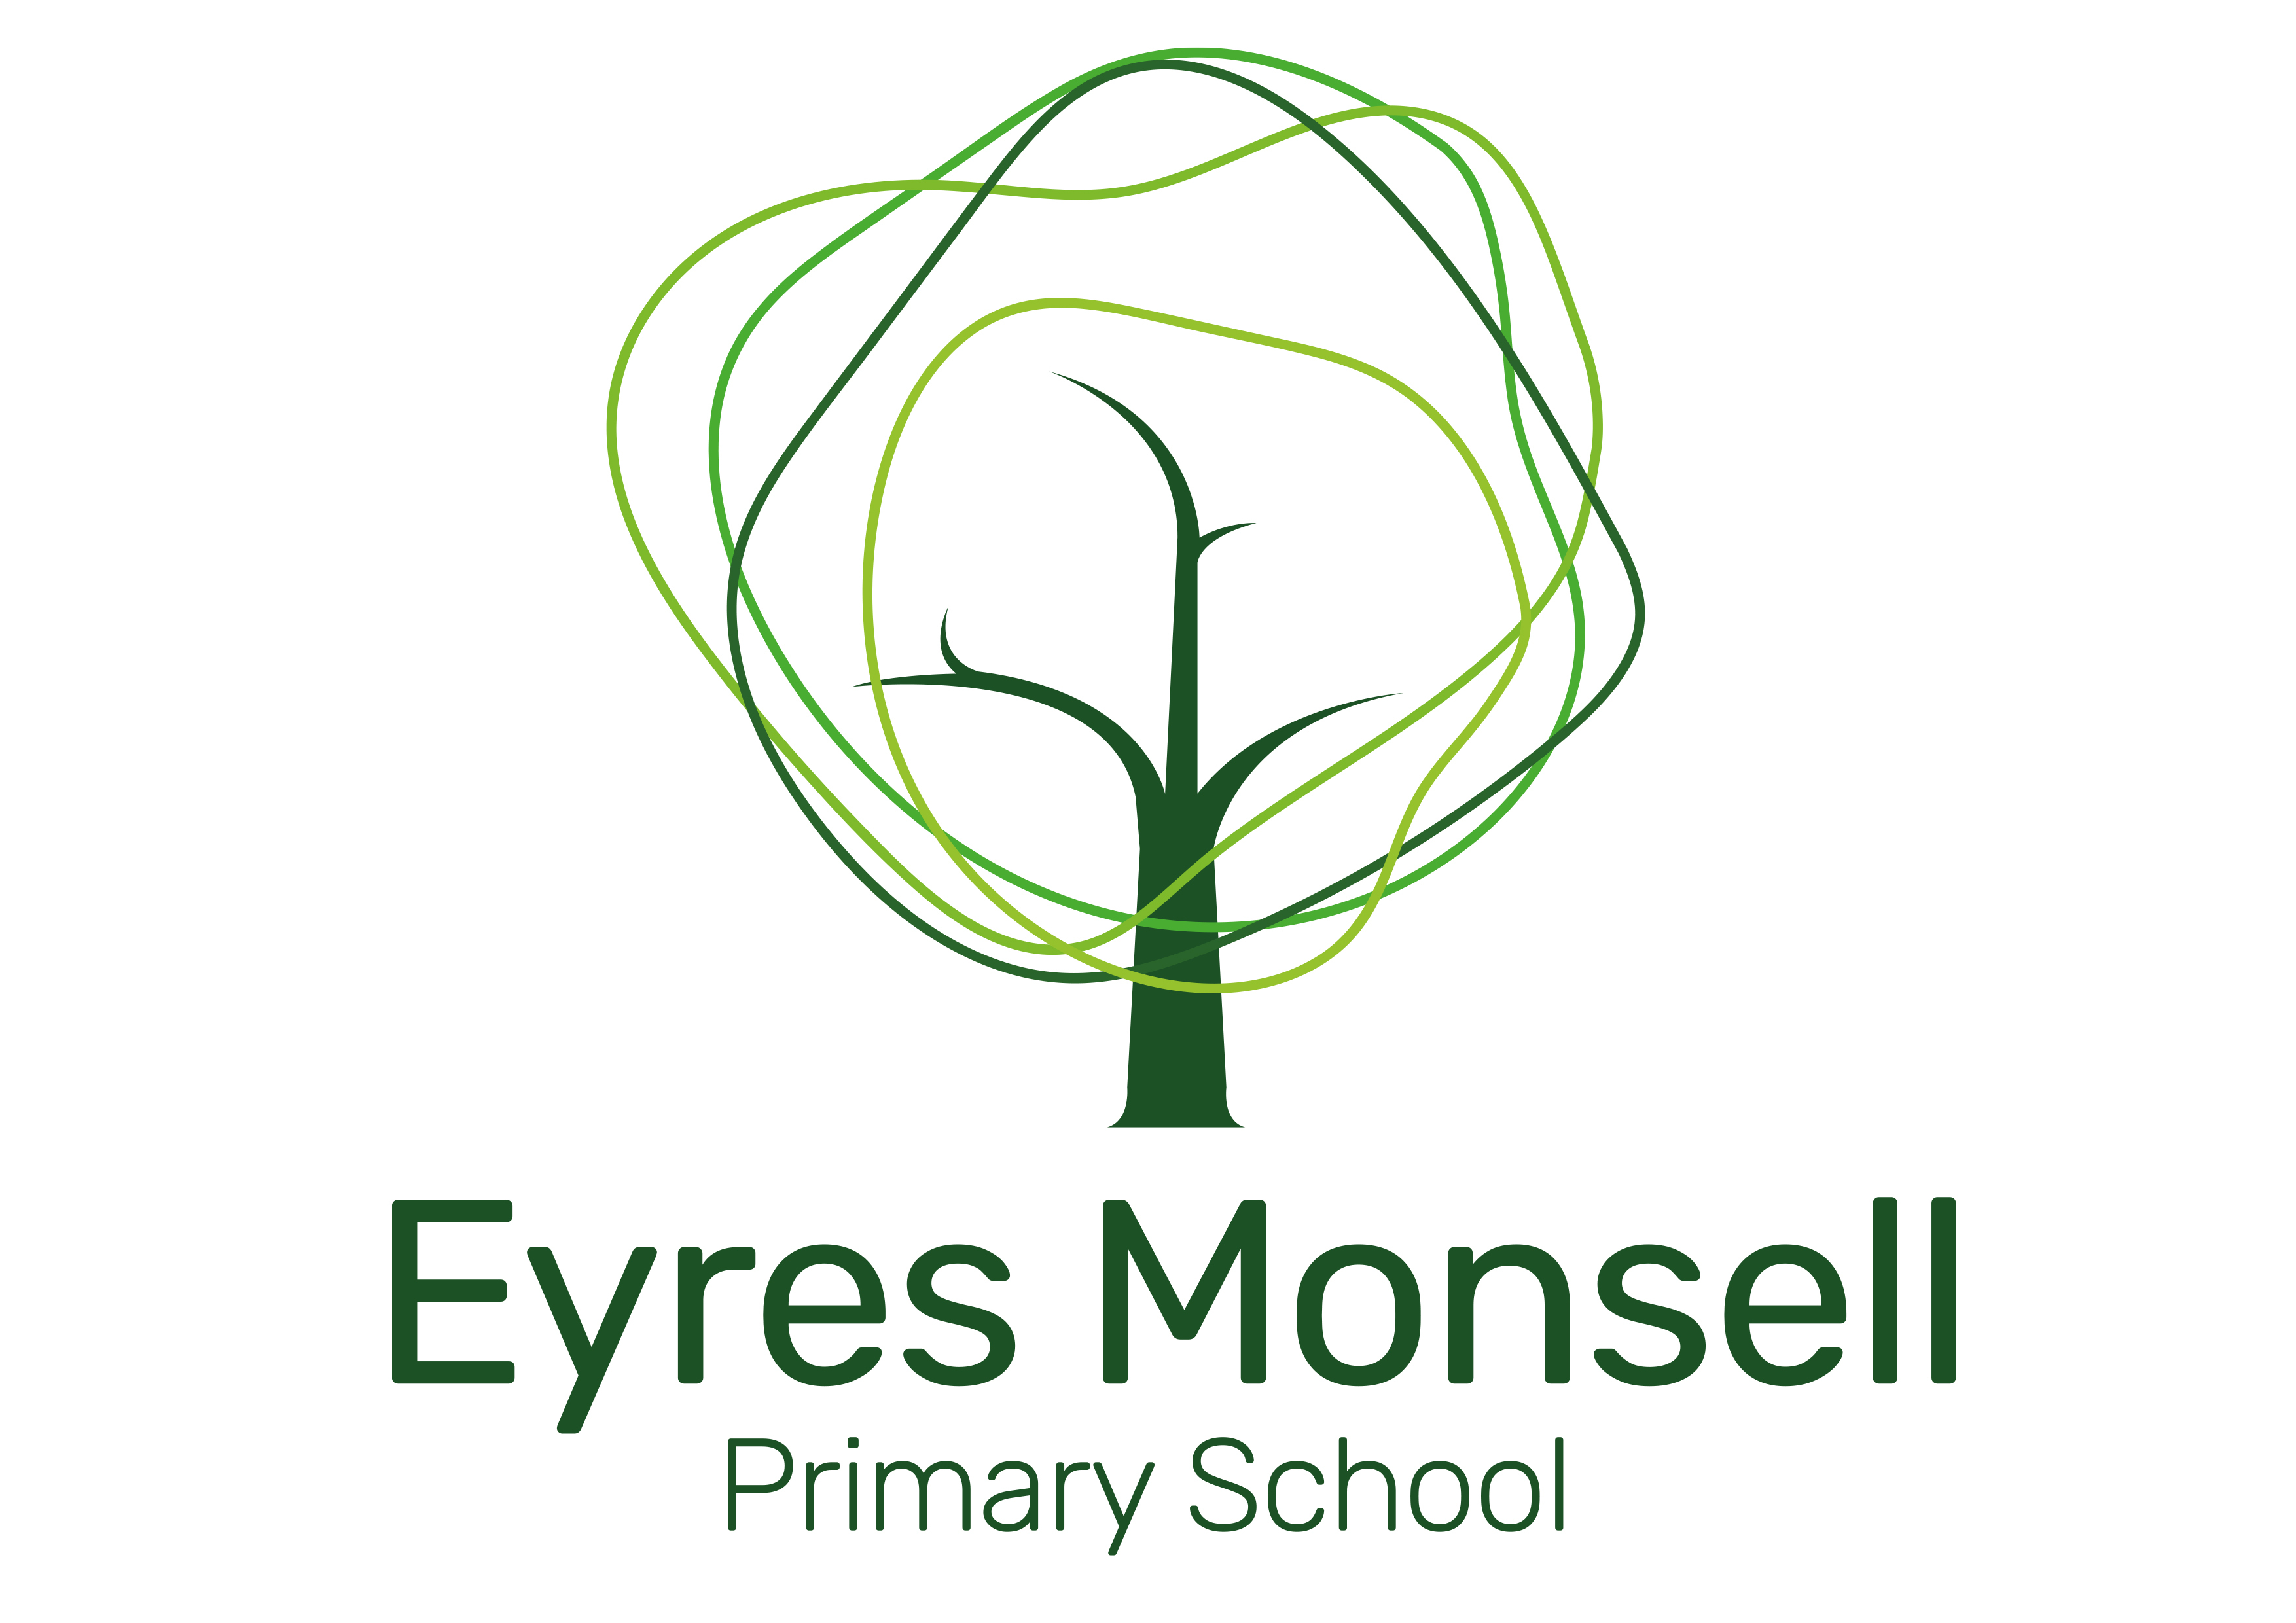 Eyres Monsell Primary School